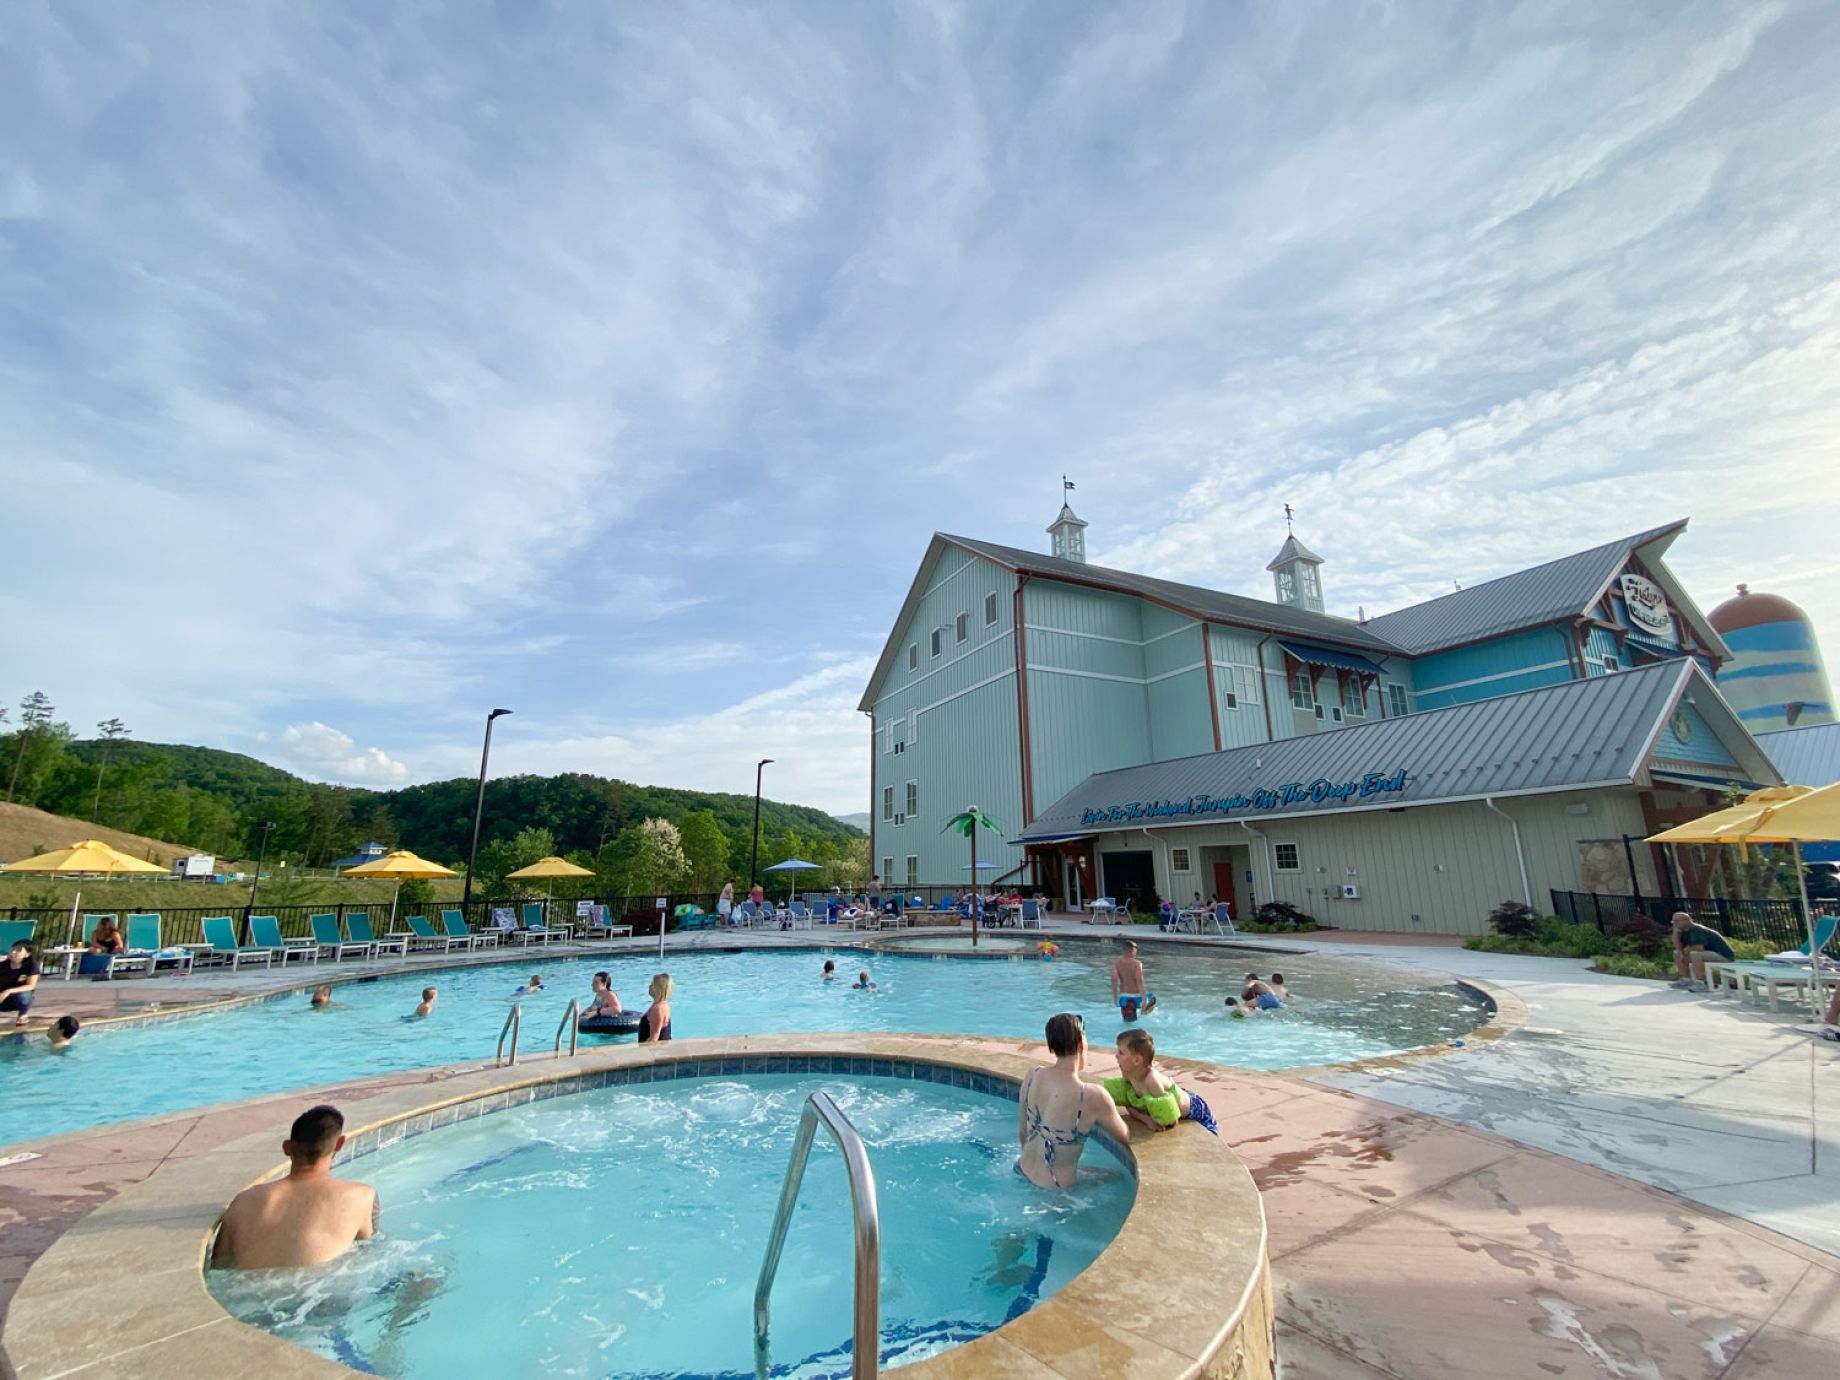 A Stay at Camp Margaritaville RV Resort in Pigeon Forge